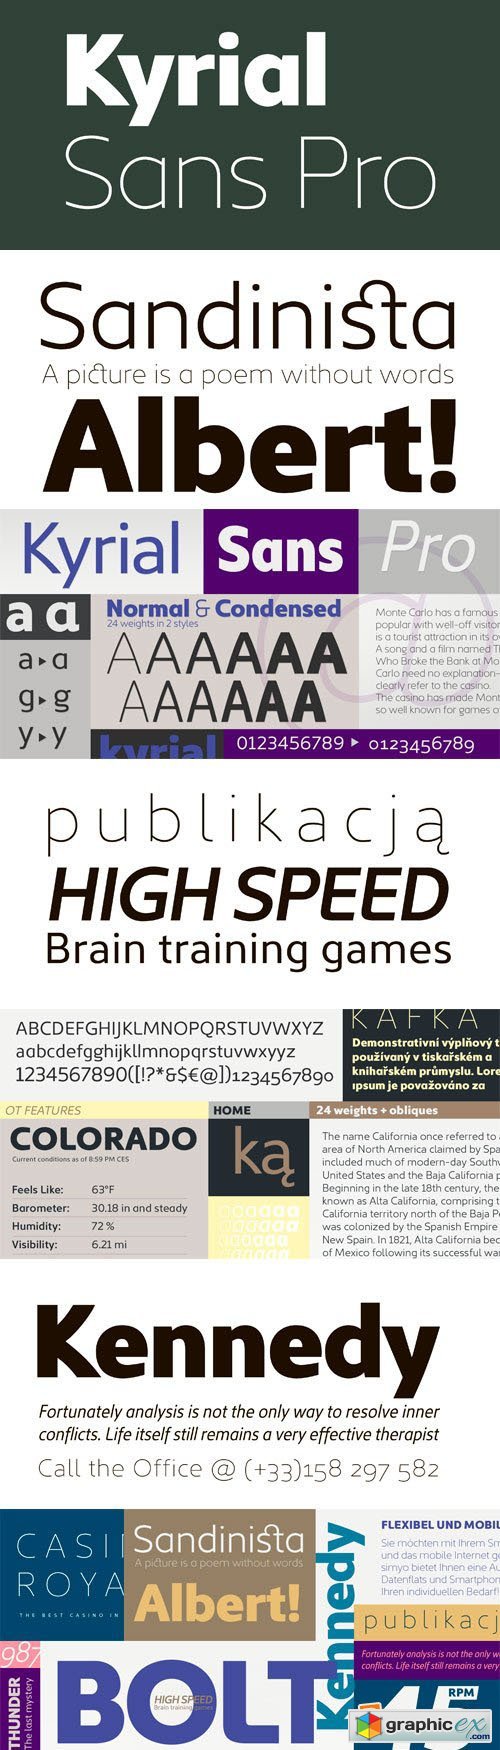 Kyrial Sans Pro Font Family - 12 Fonts (Incomplete Family) for $299